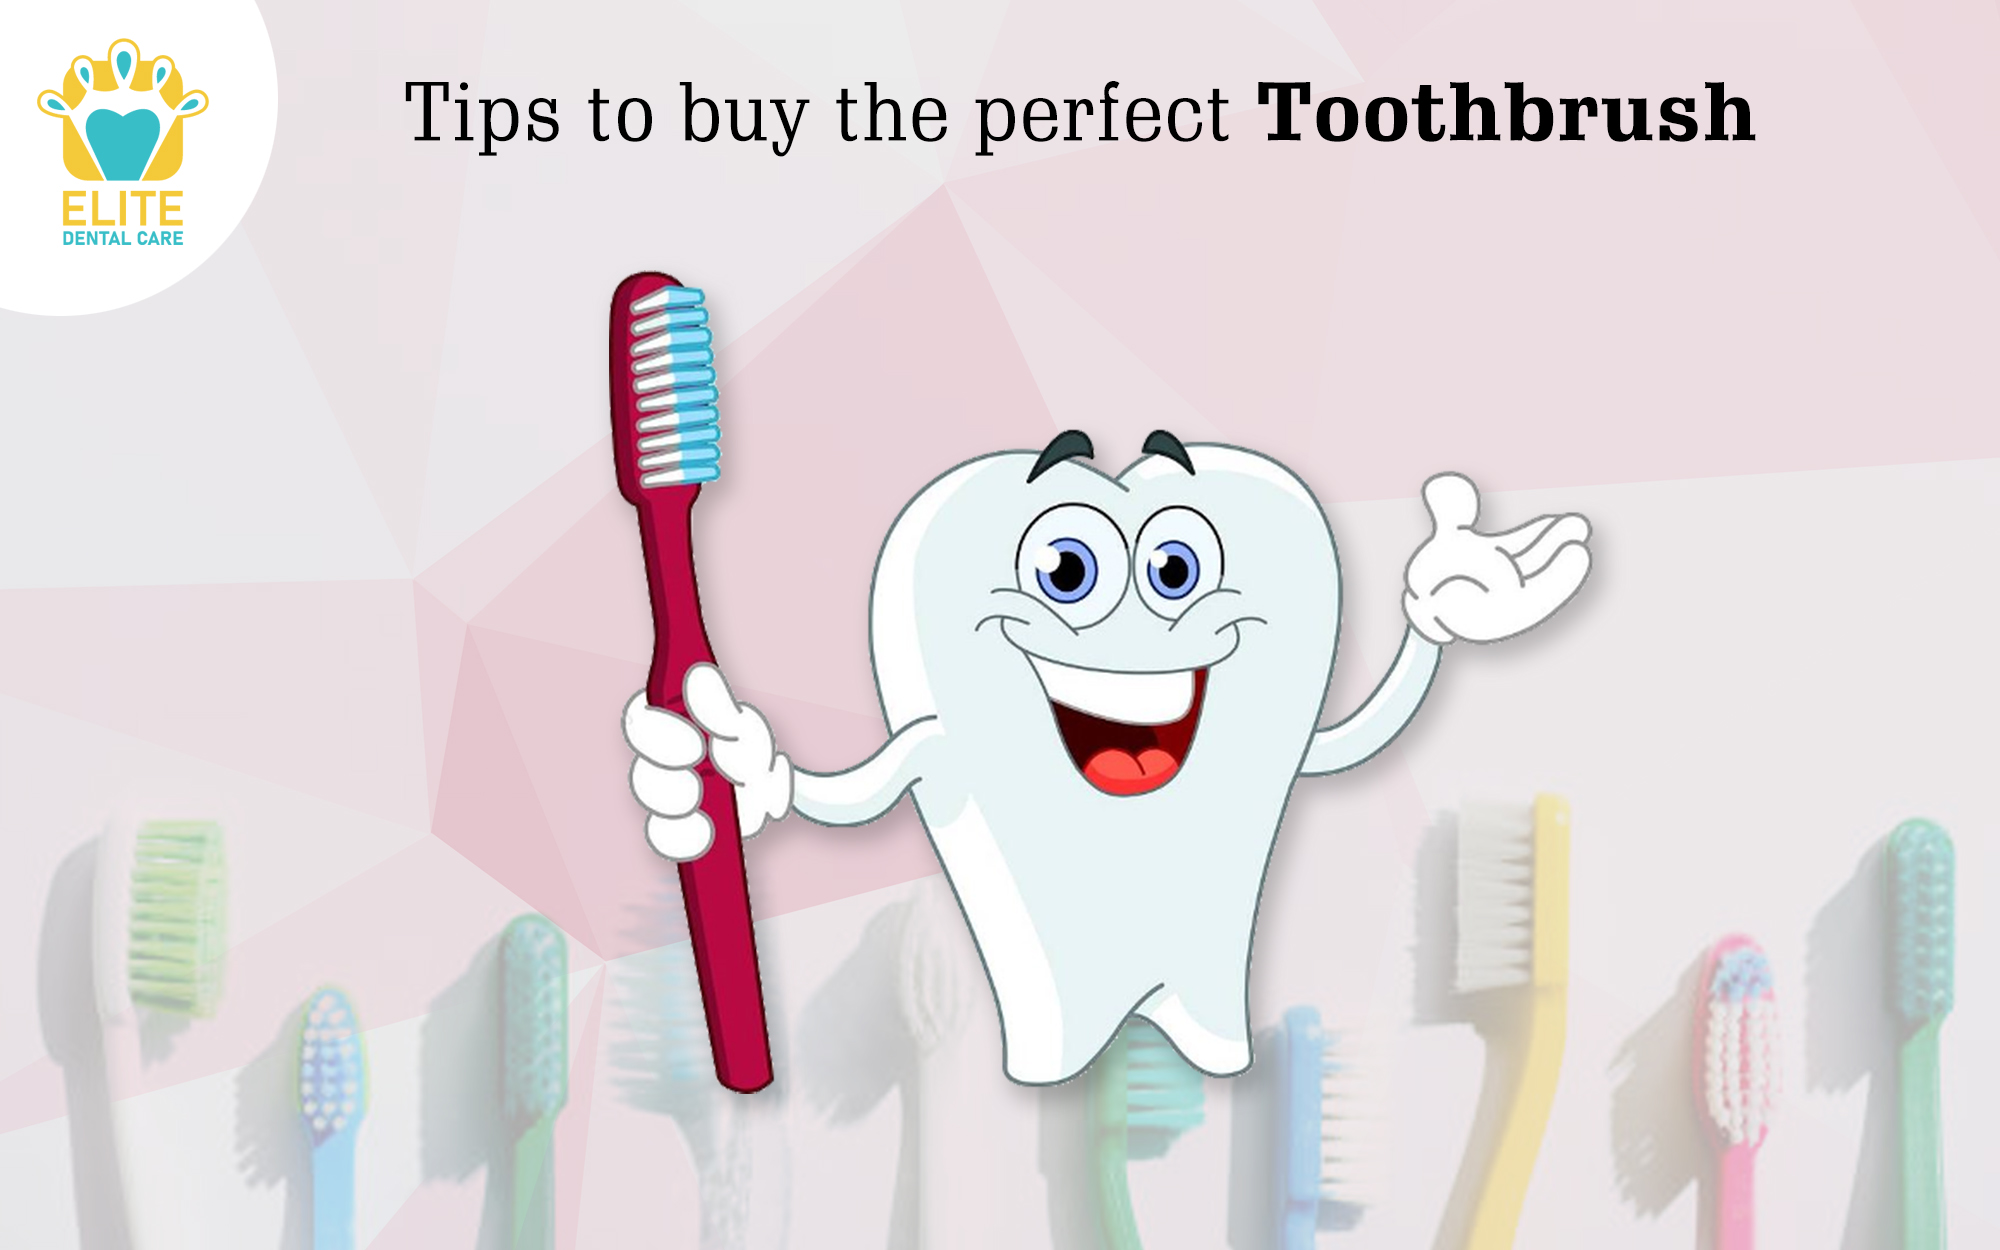 HOW TO CHOOSE THE RIGHT TOOTHBRUSH?